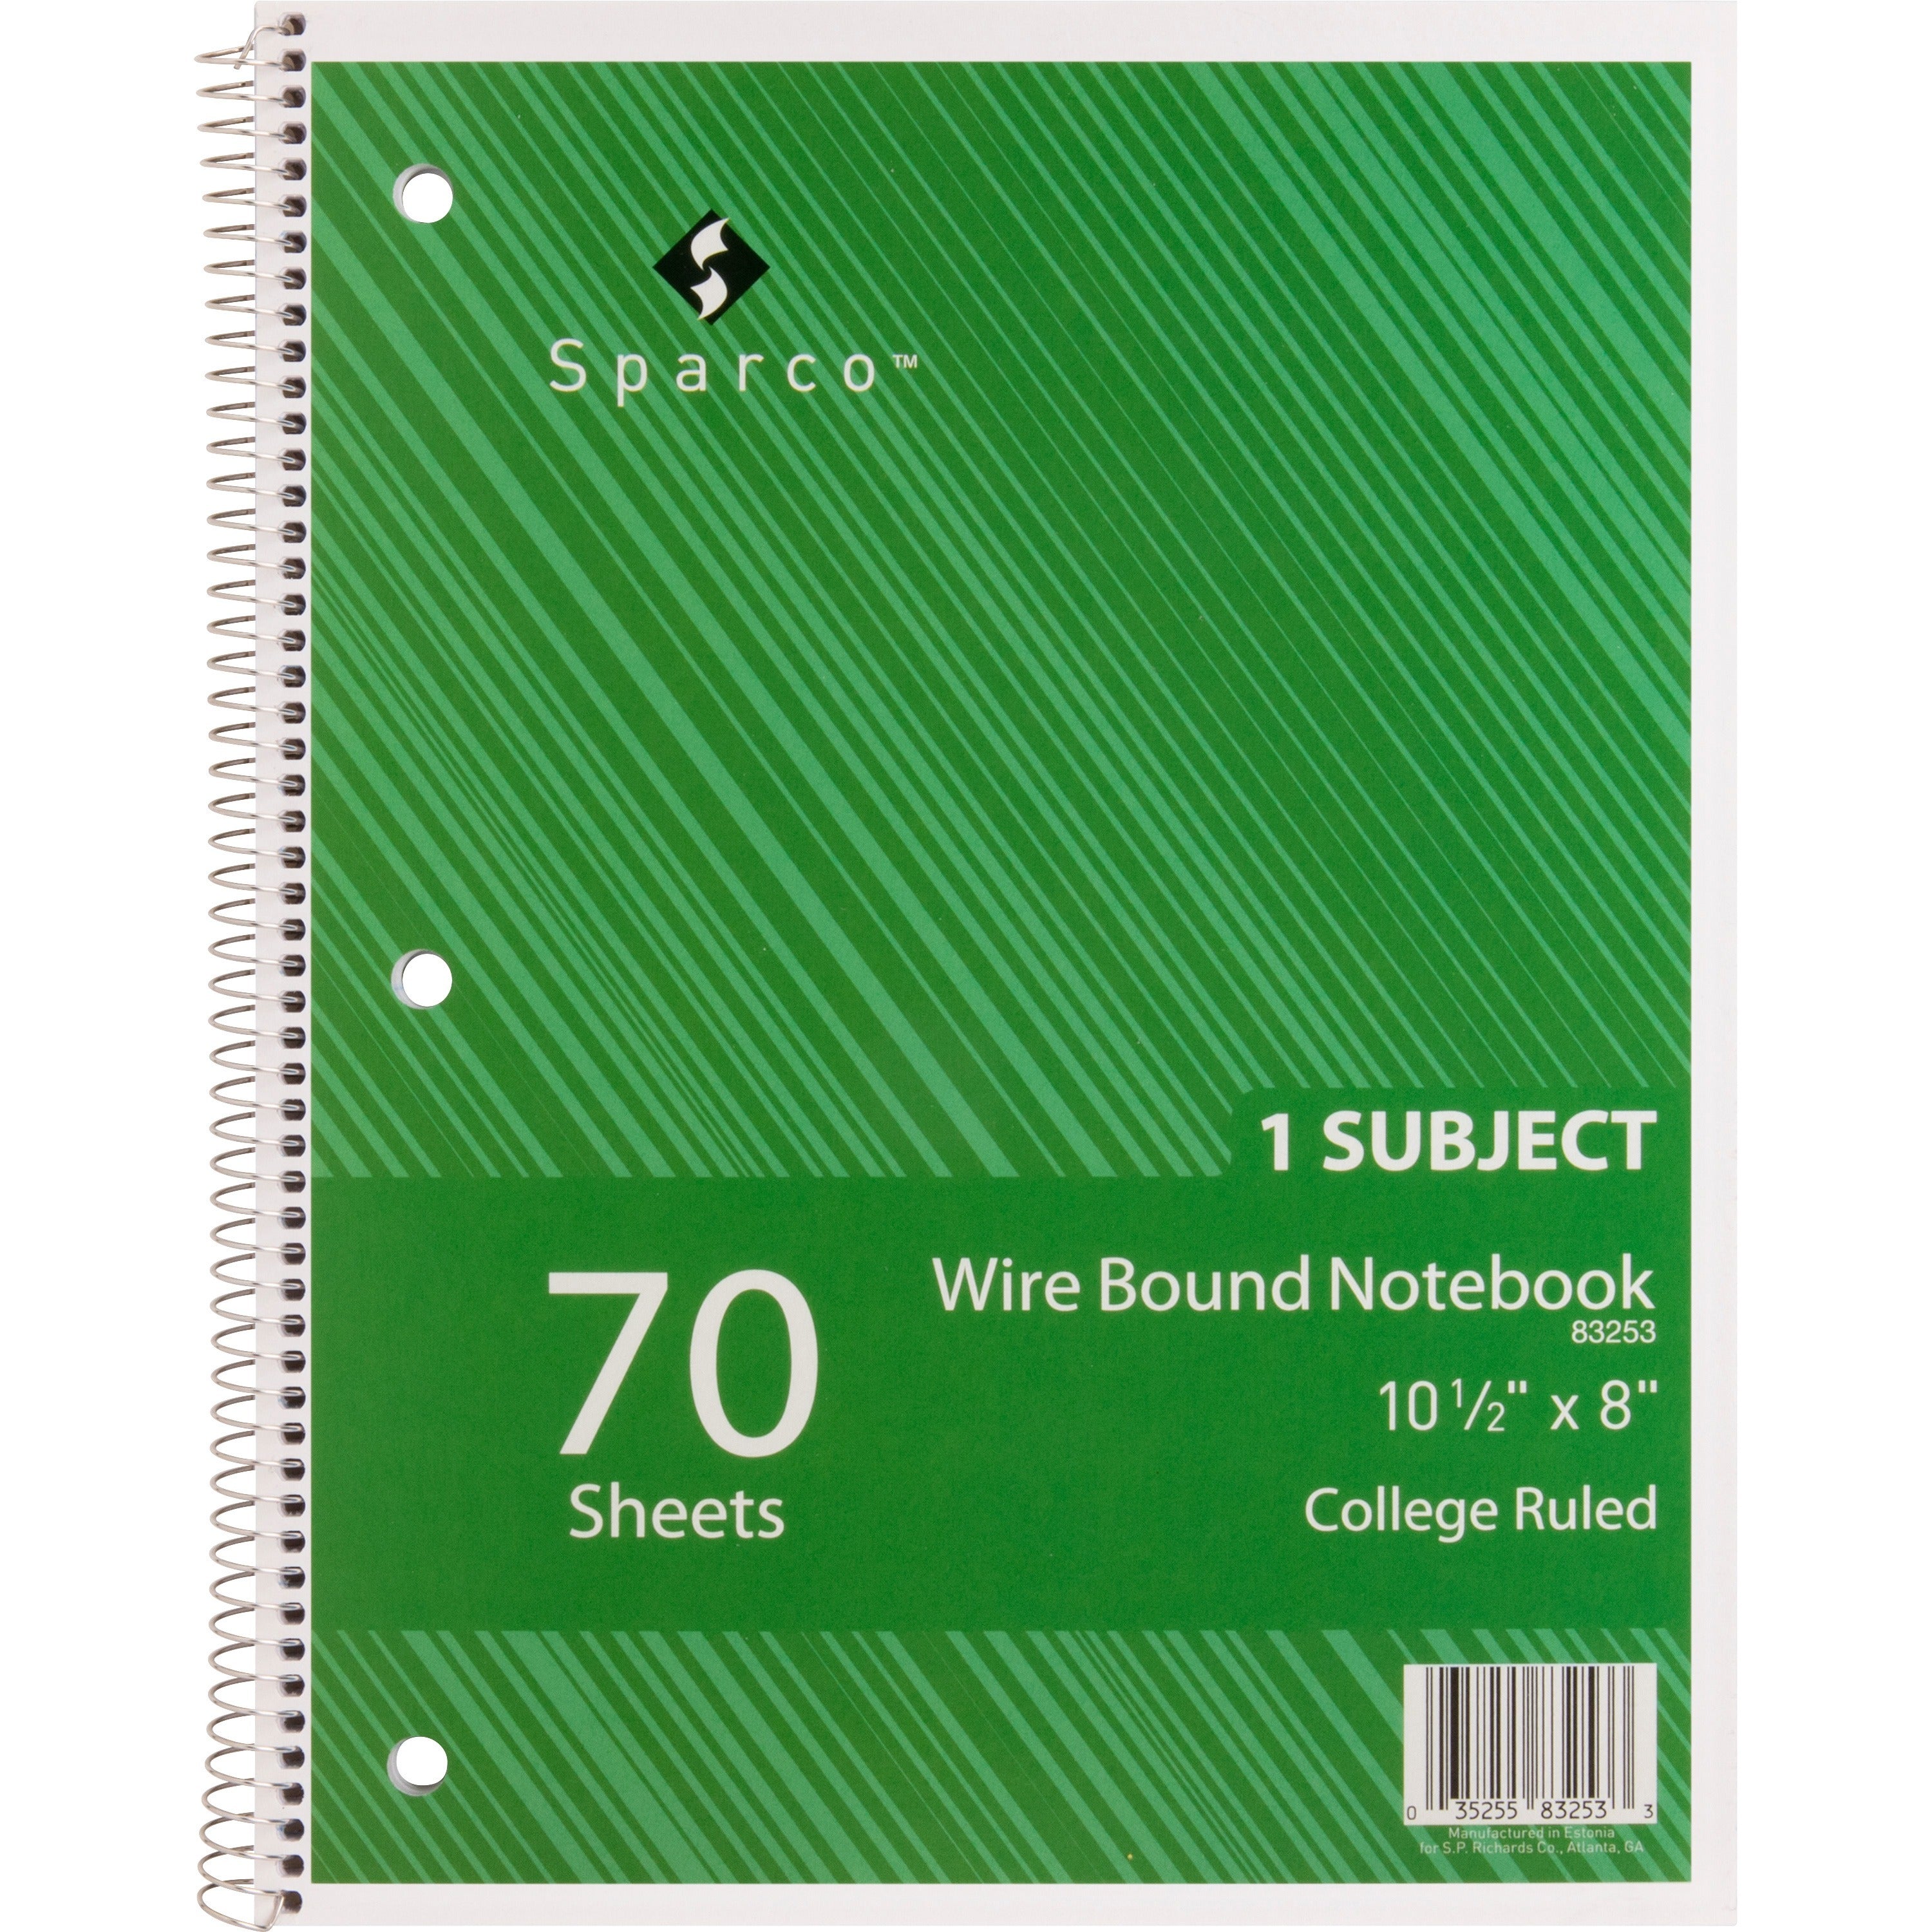 sparco-wirebound-notebooks-70-sheets-wire-bound-college-ruled-unruled-margin-16-lb-basis-weight-8-x-10-1-2-assortedchipboard-cover-subject-stiff-cover-stiff-back-perforated-hole-punched-5-bundle_spr83253bd - 2